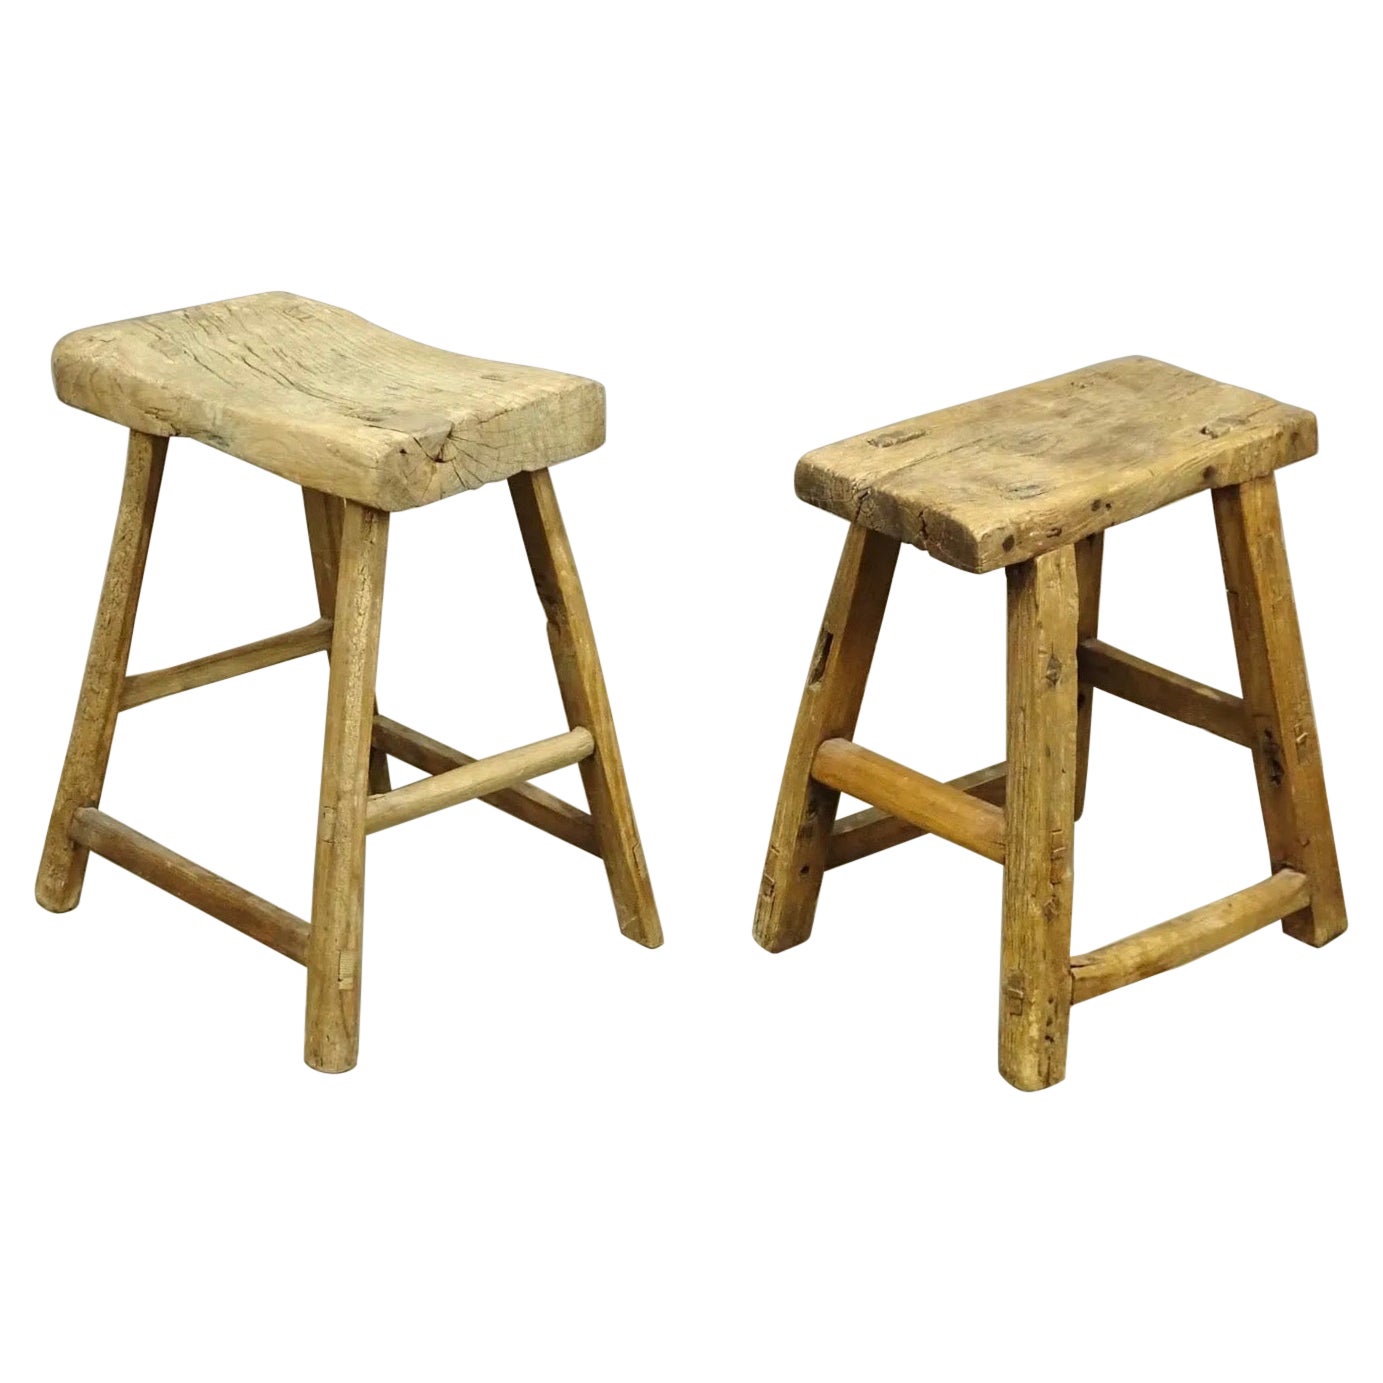 Two Rustic Chinese Stools, Sold Separately